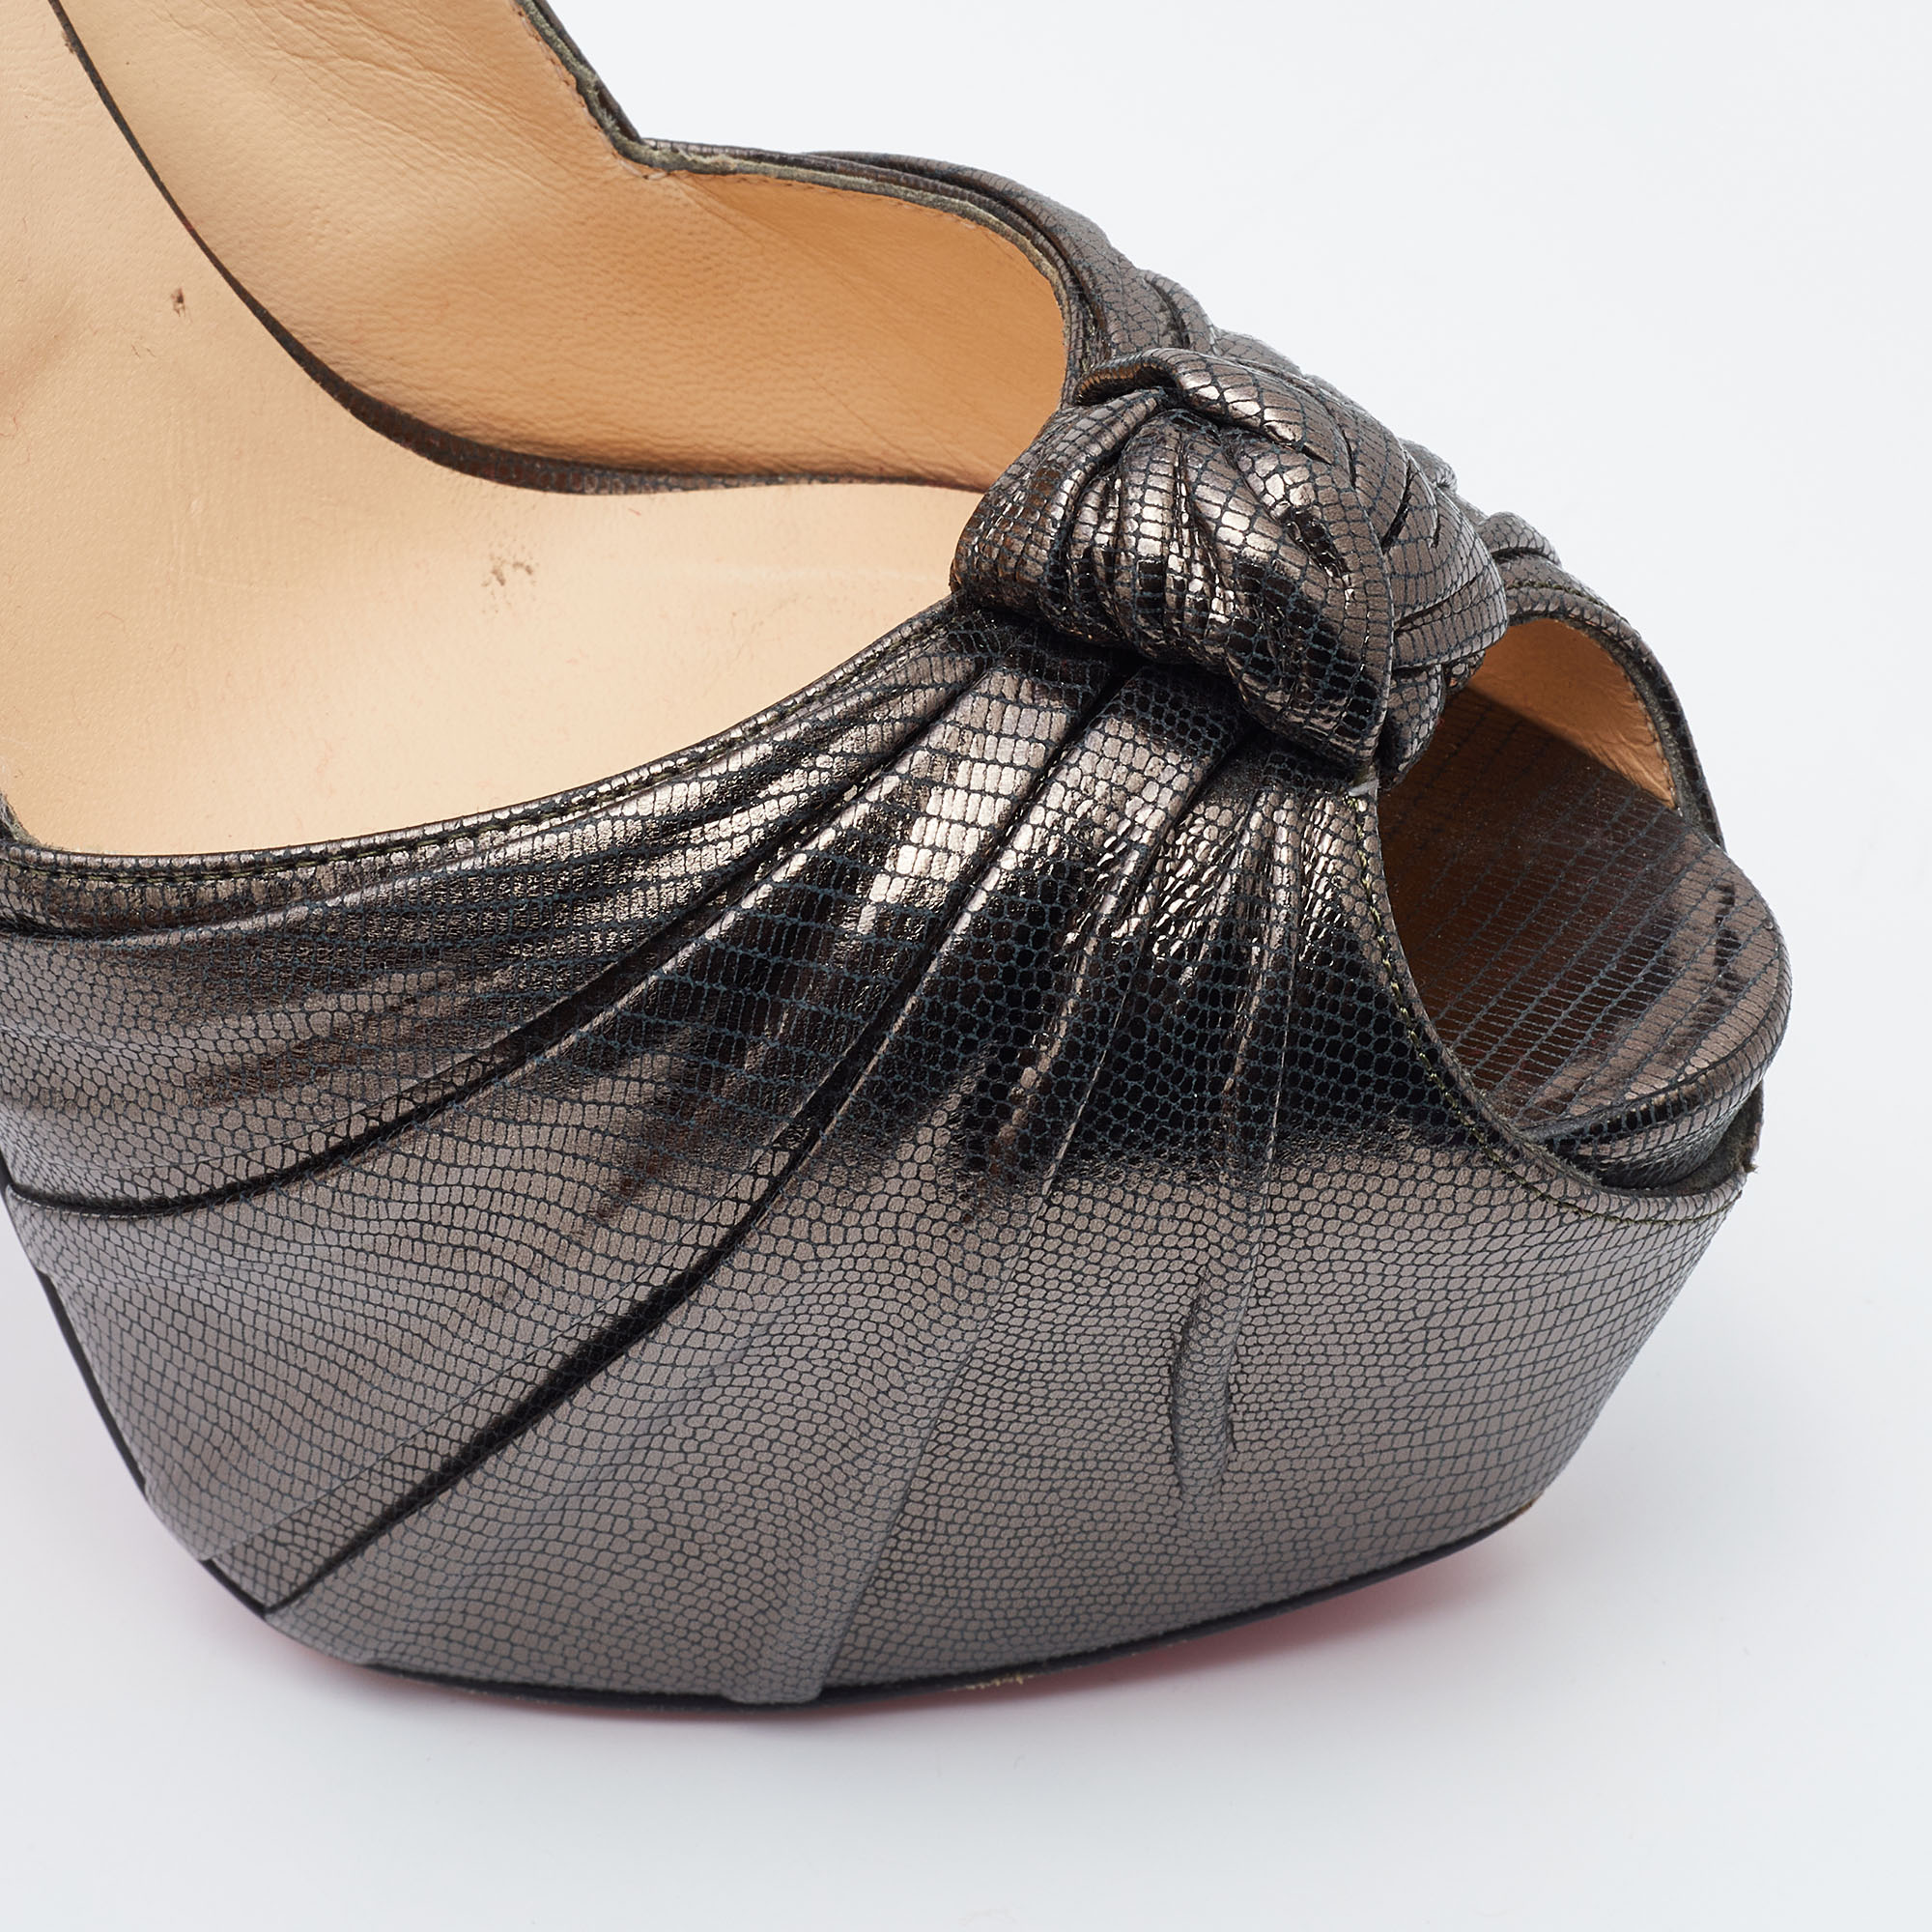 Christian Louboutin Metallic Grey Laminated Suede Miss Benin Knotted Pumps Size 40